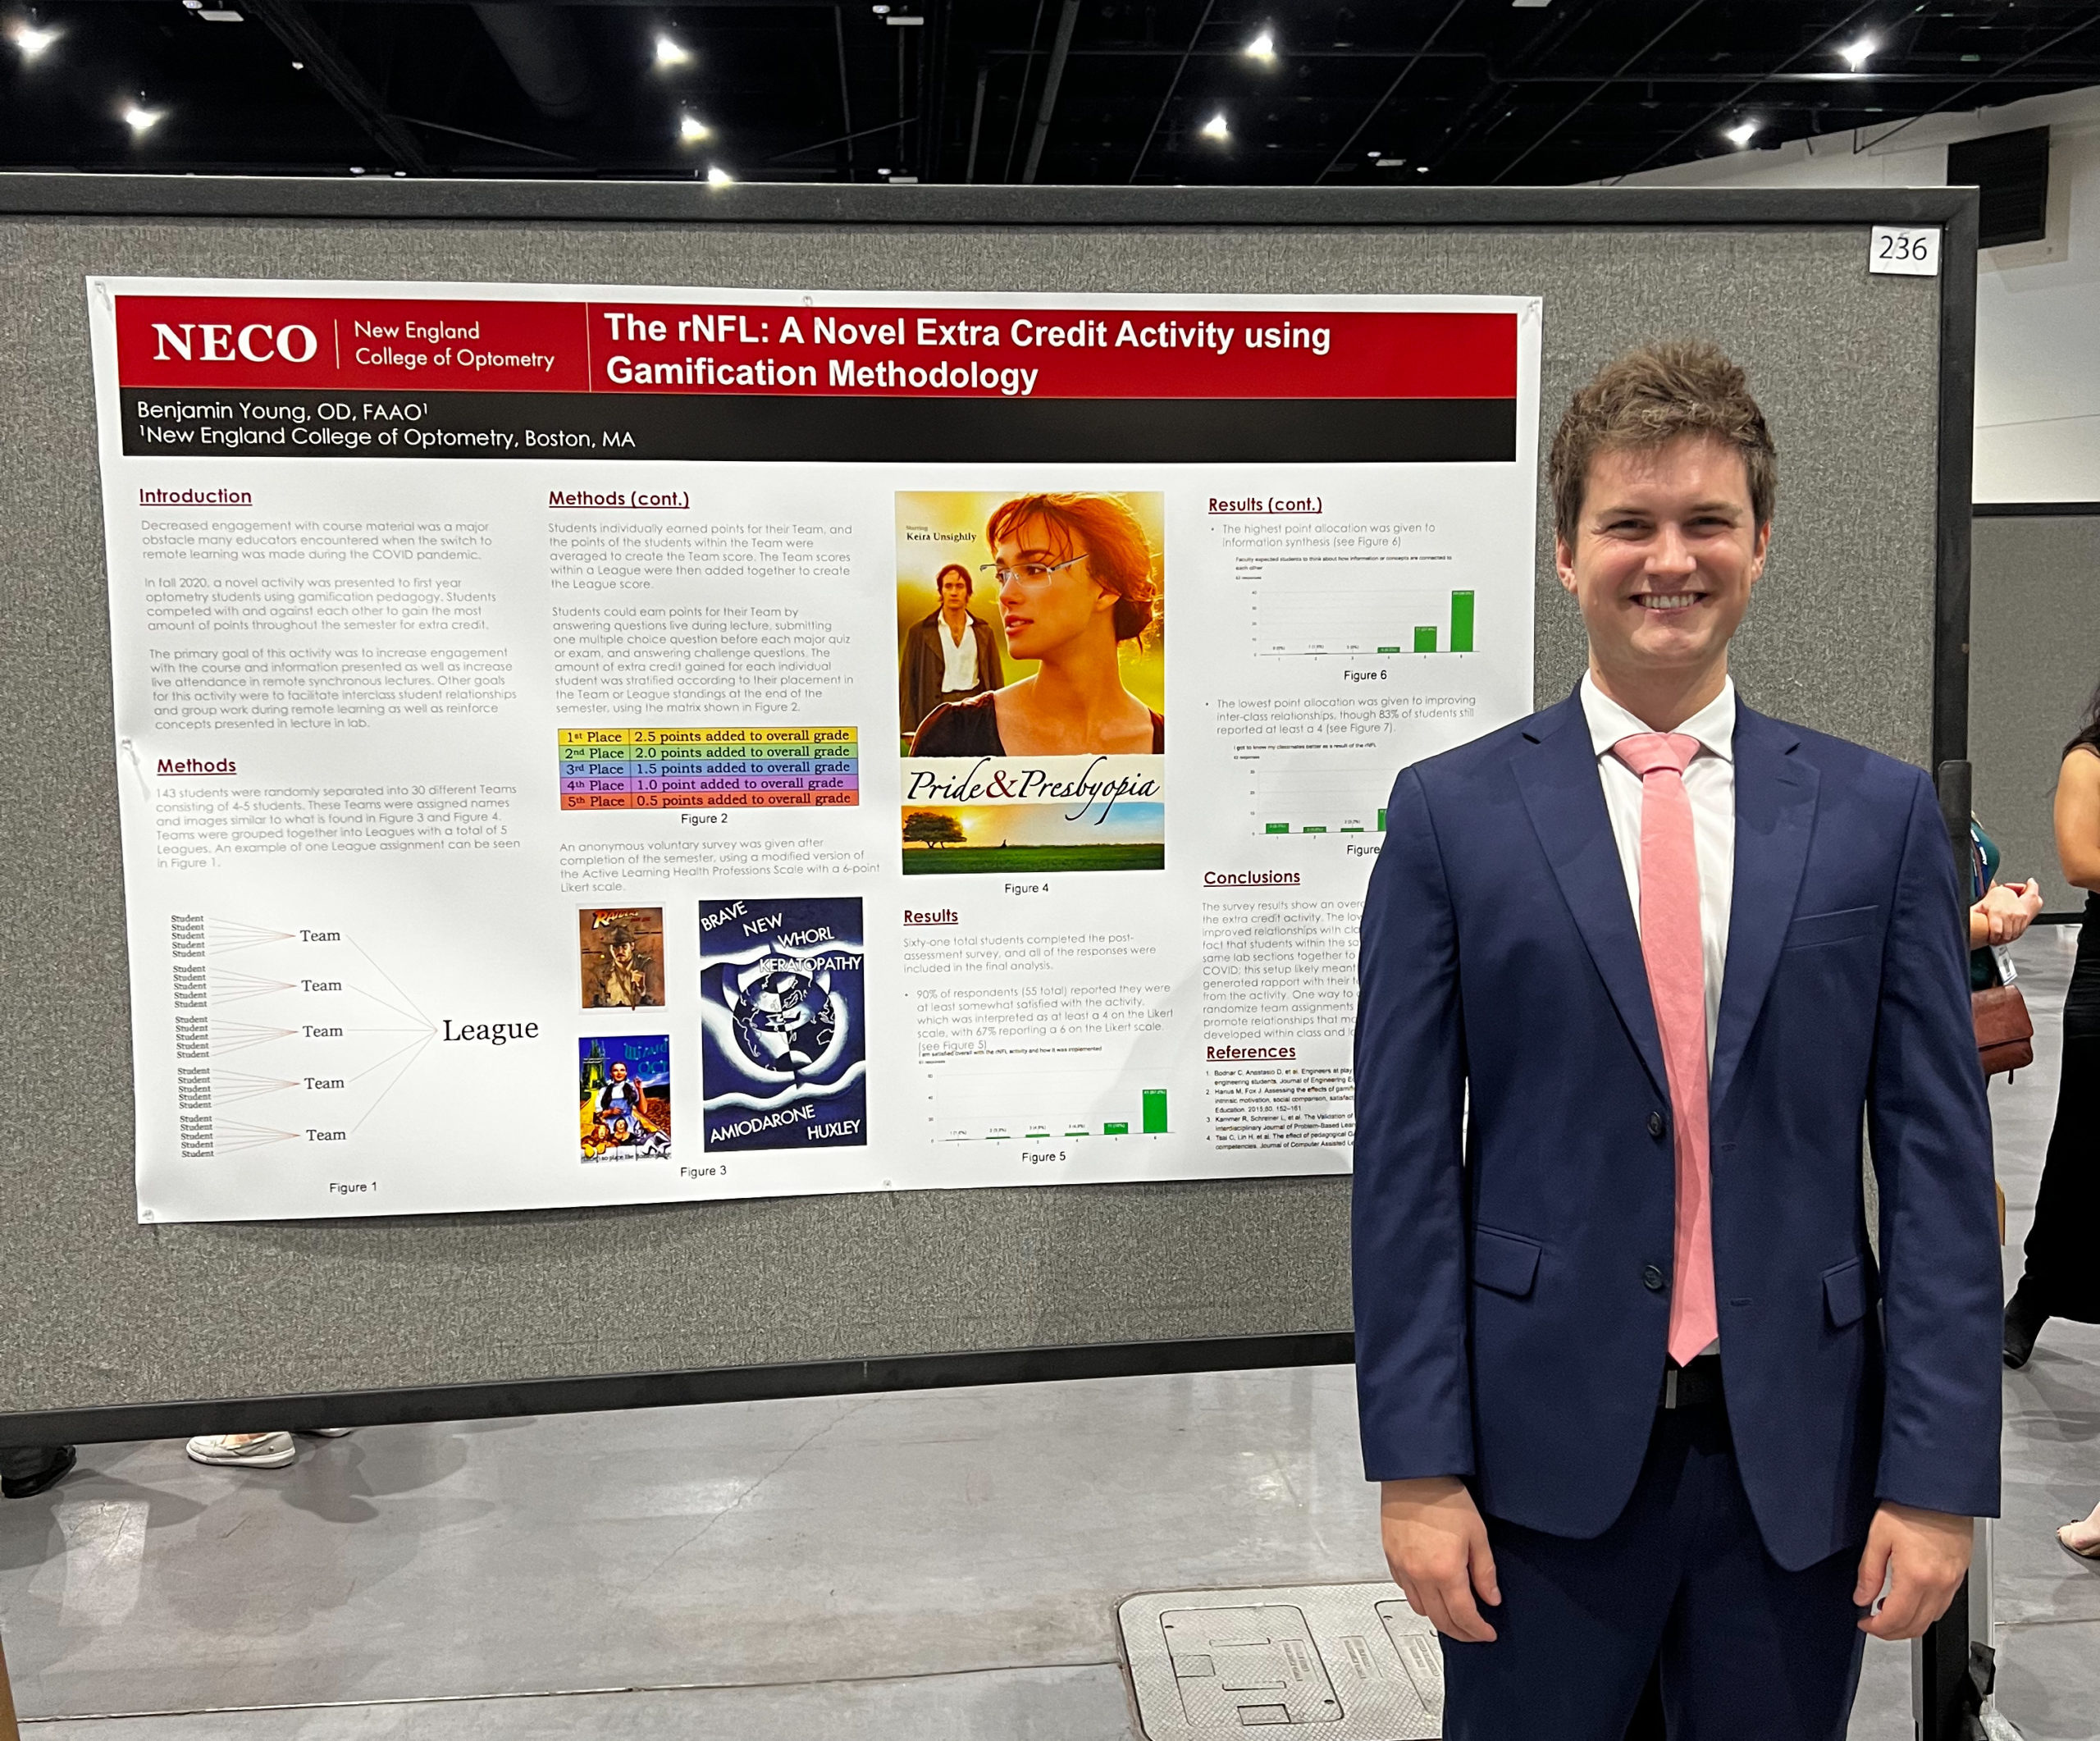 Man in suit stands in front of research poster